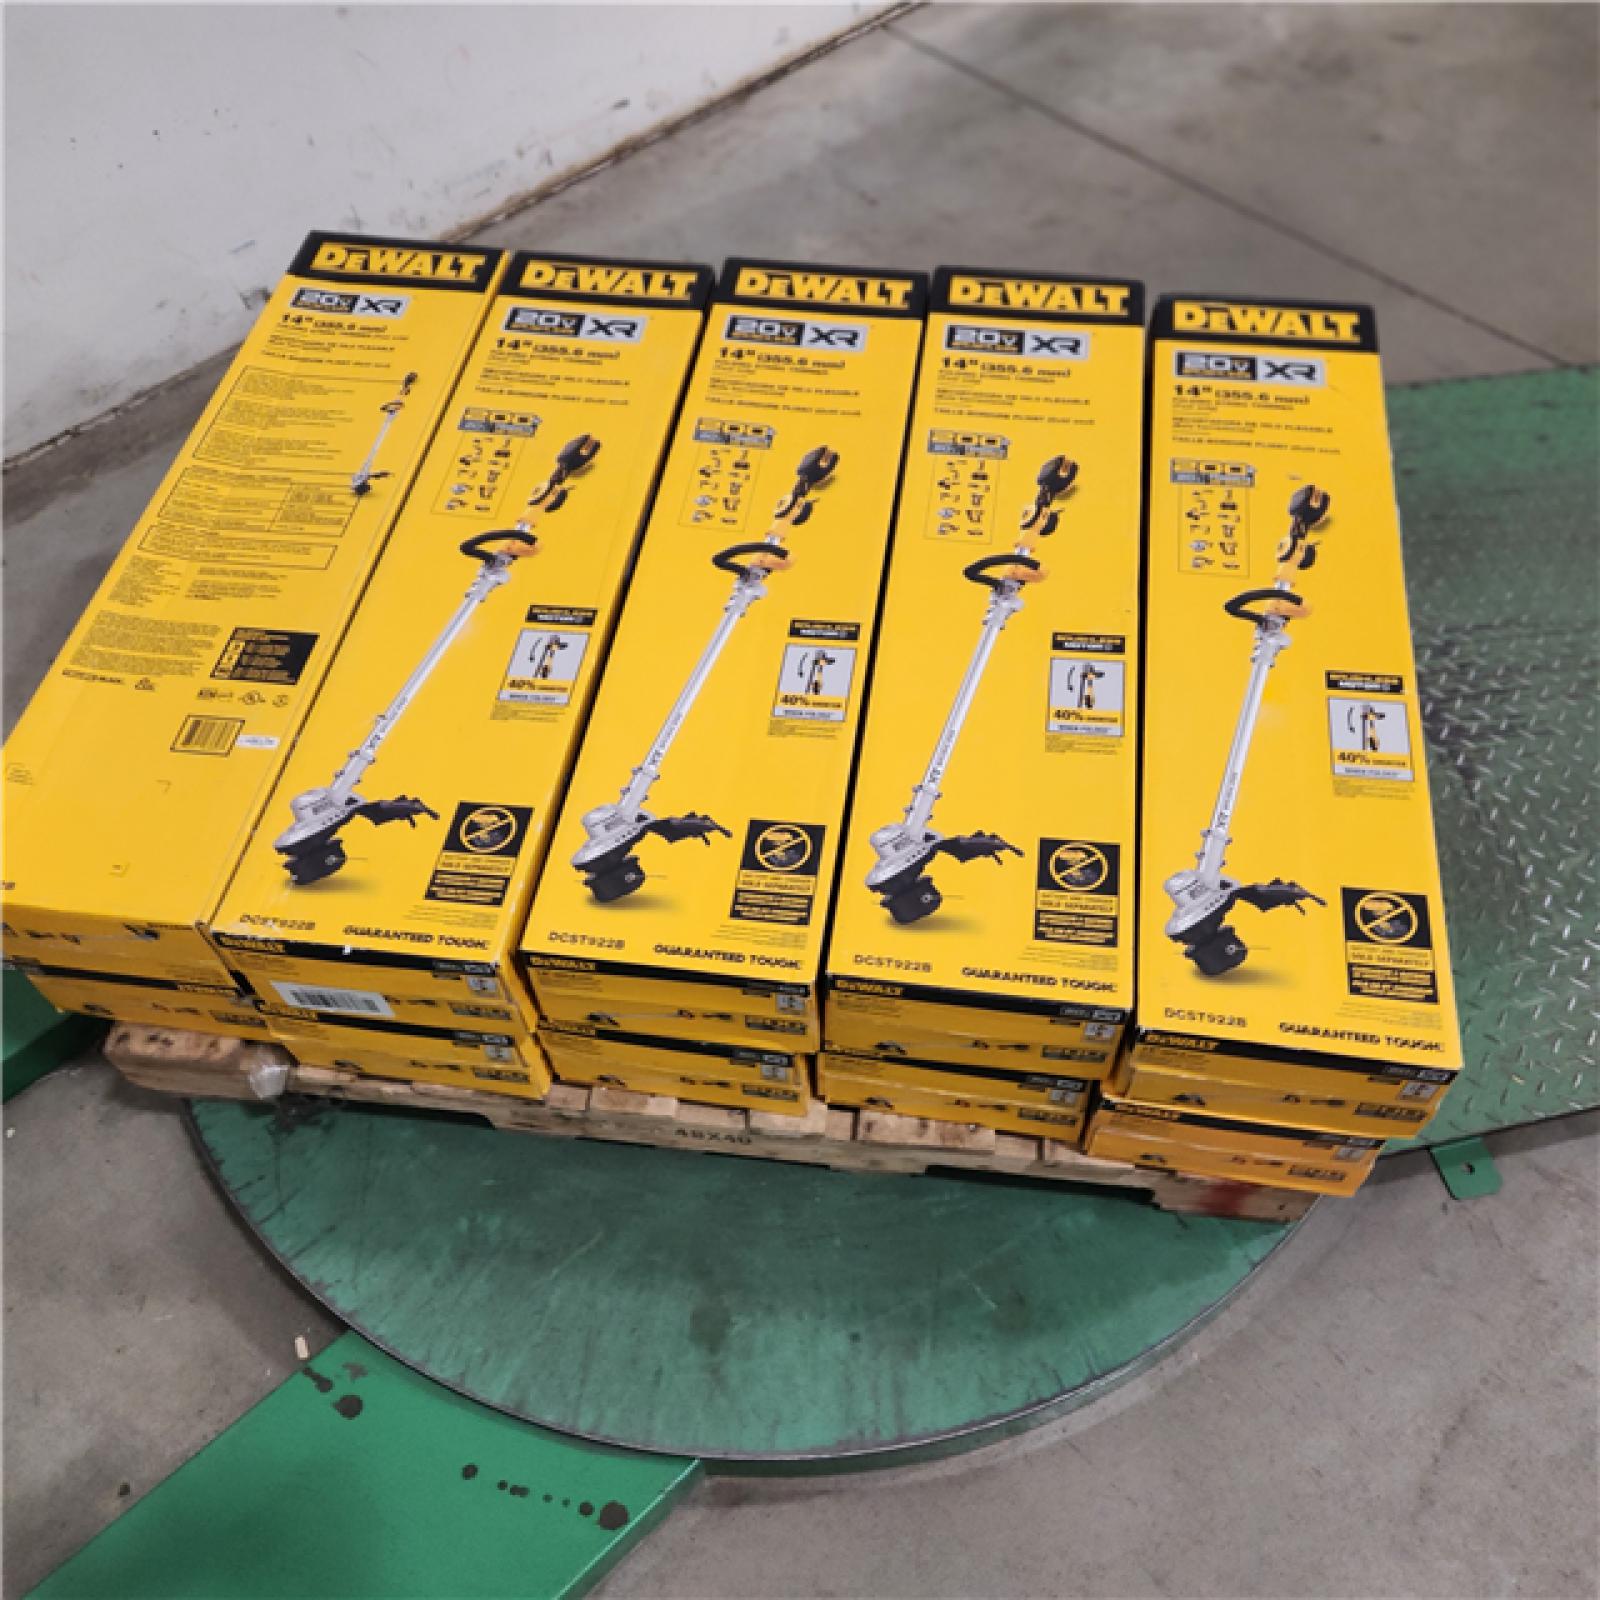 DALLAS LOCATION  NEW -DeWalt 20V MAX DCST922B 14 in. 20 V Battery String Trimmer Tool Only (Lot Of 10